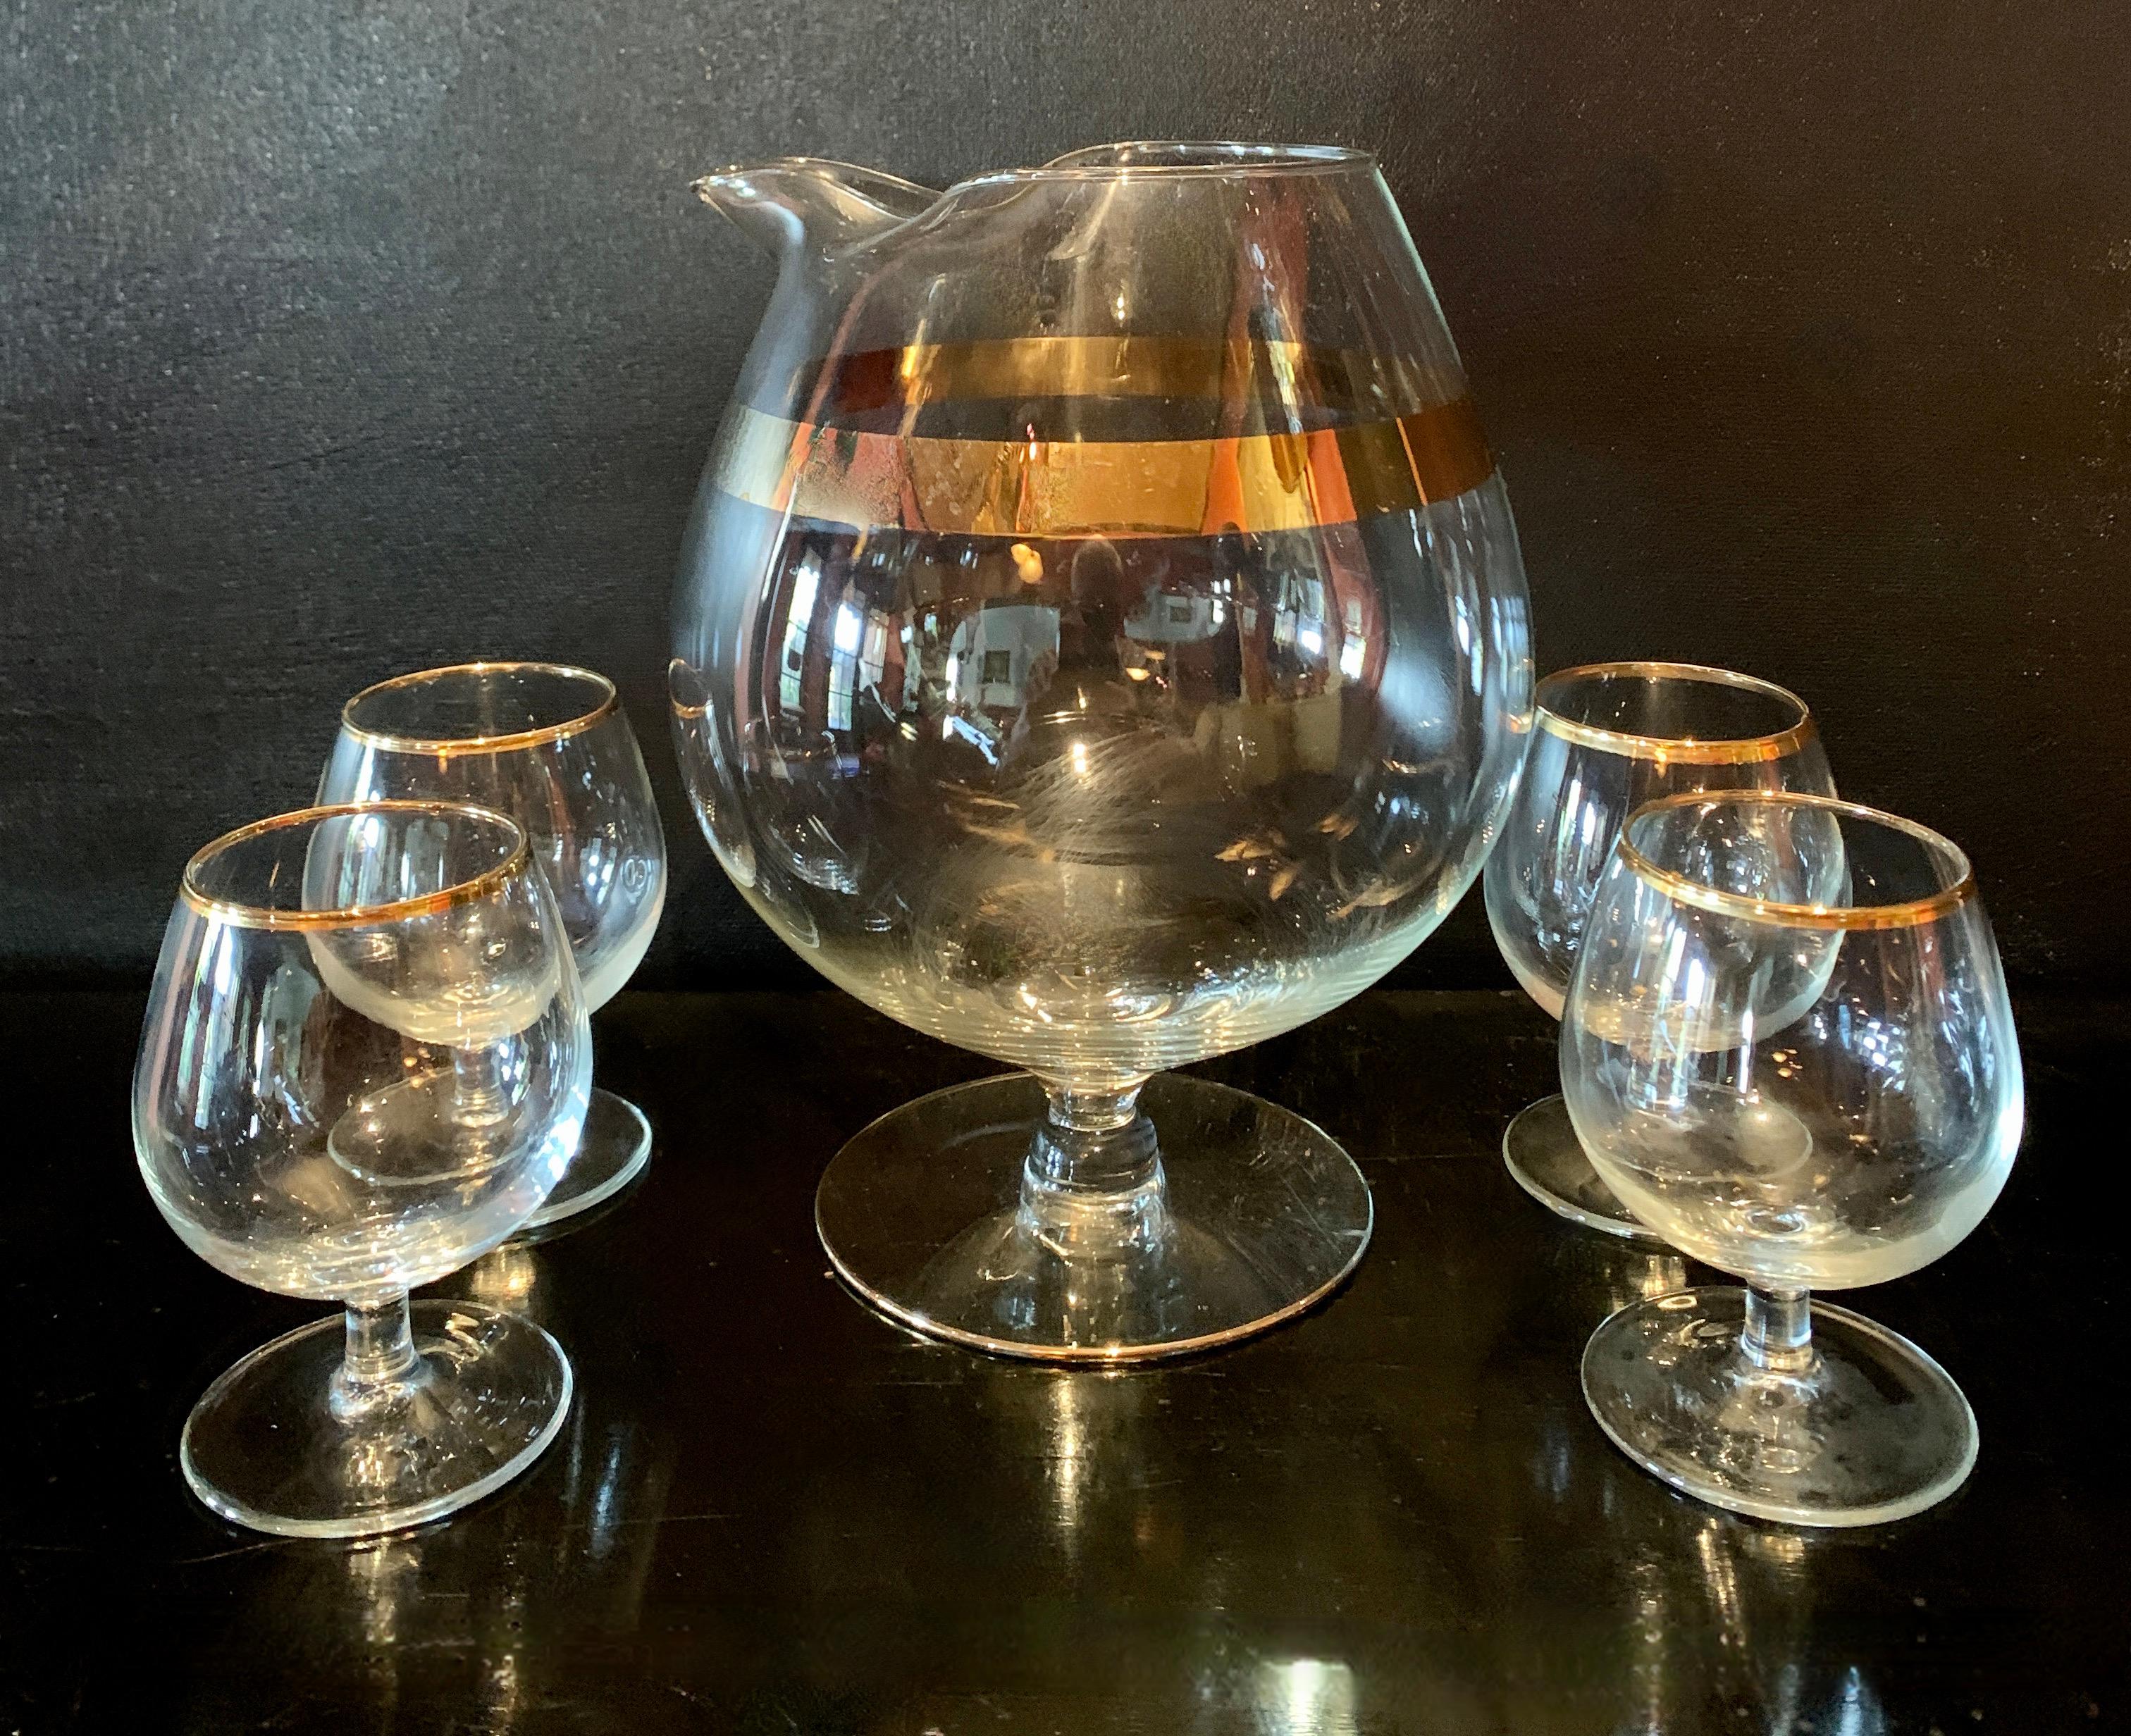 A lovely set of bar war. a Brandy Pitcher and glasses with gold rims - a compliment to any bar area.. very chic and ready to start the party. Hollywood Regency in the style of Dorothy Thorpe.